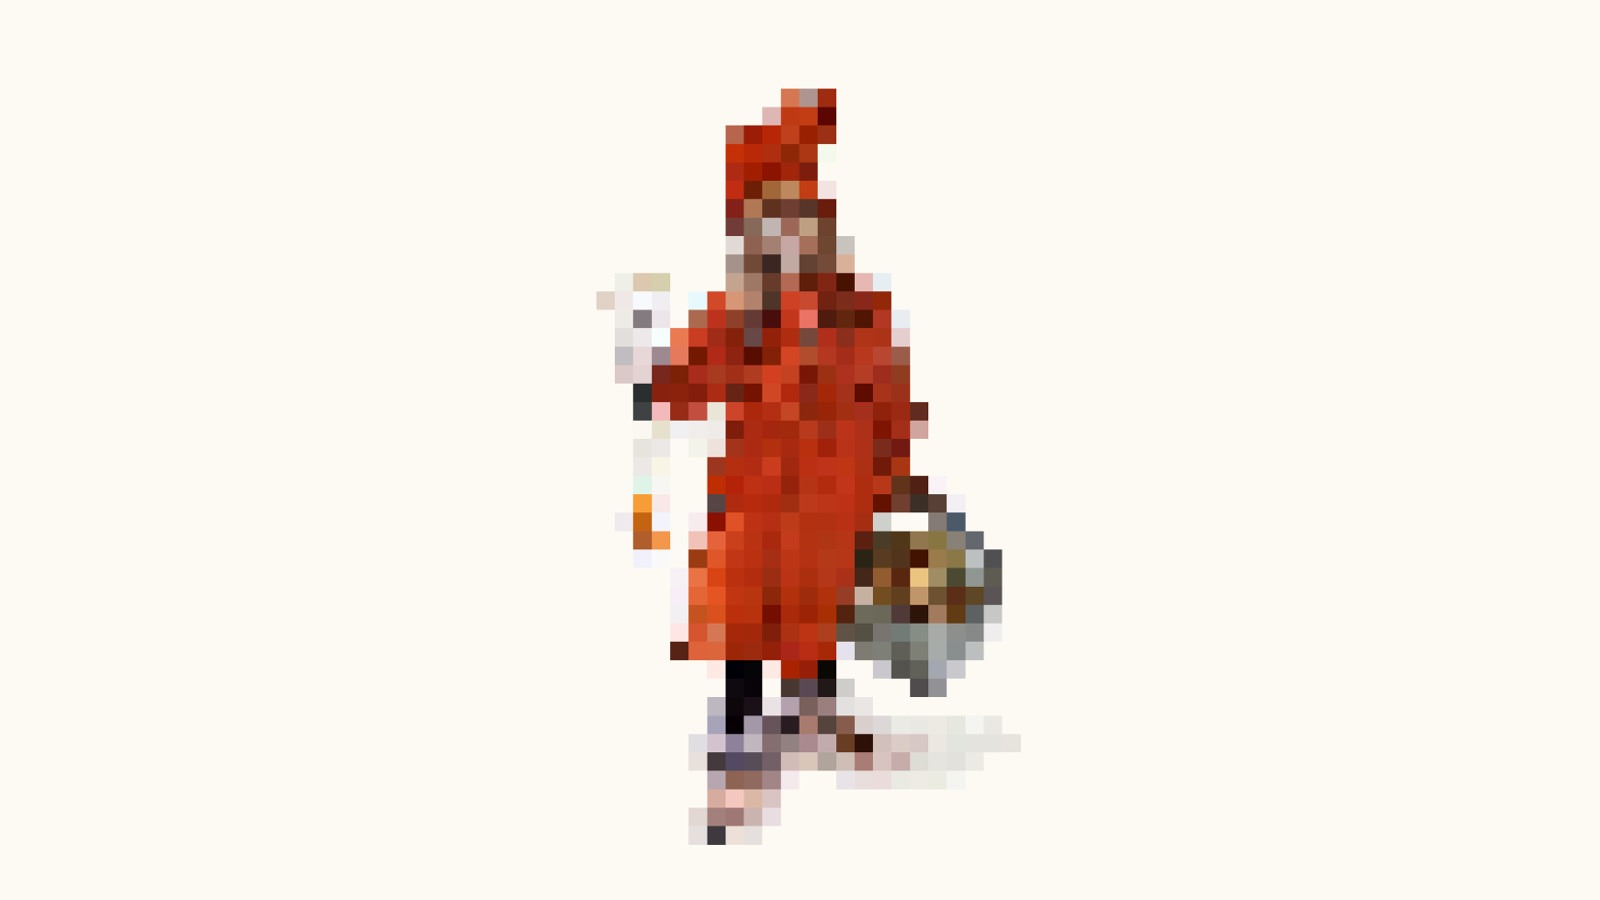 A pixelated version of the famous painting “Brita as Idun”, a young girl in a red dress, by Swedish painter Carl Larsson.